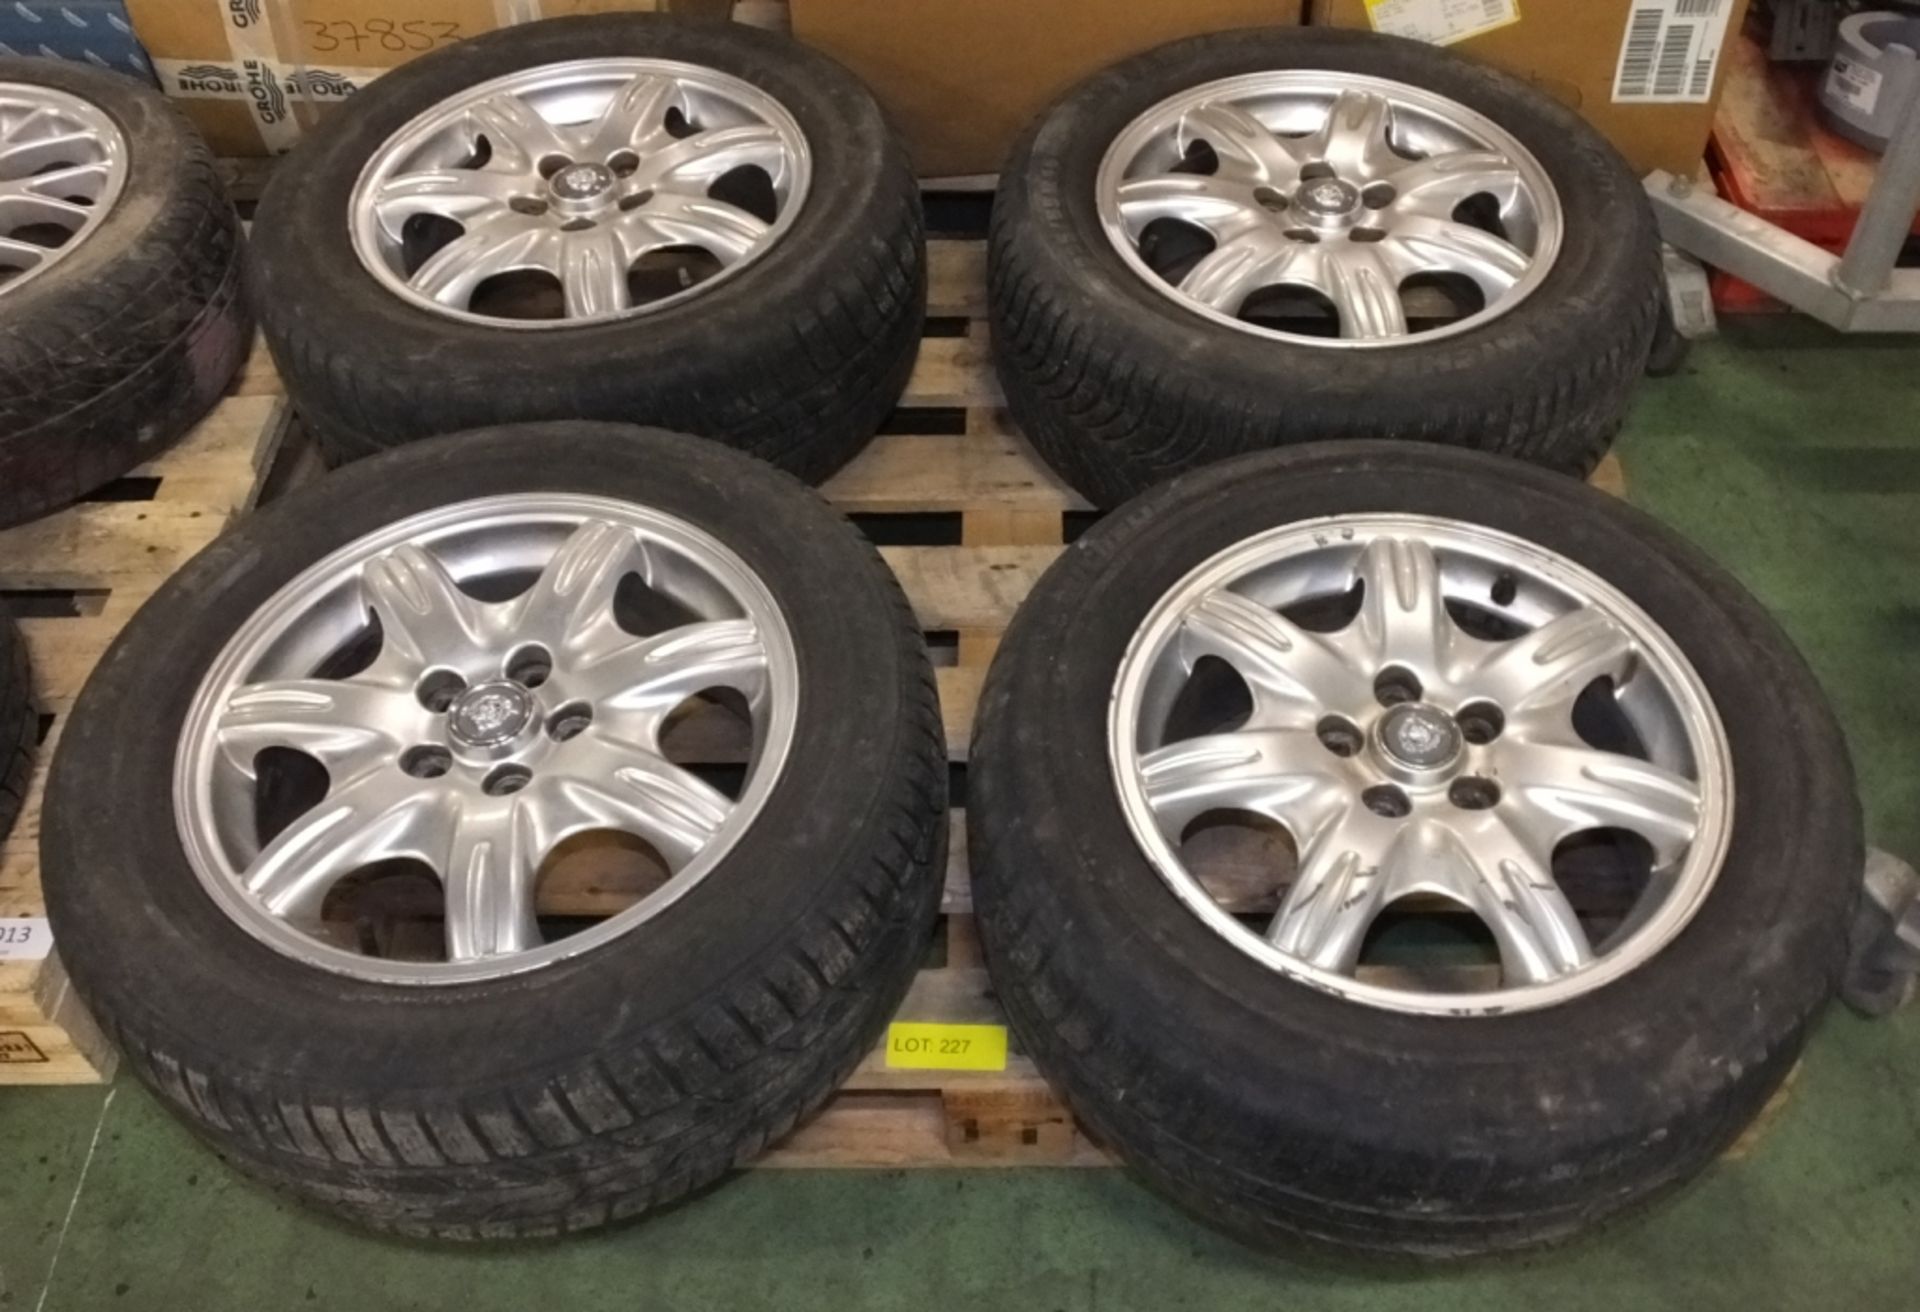 4 Jaguar 225/55 R16 alloy wheels with Jaguar centre caps - Please note there will be a loa